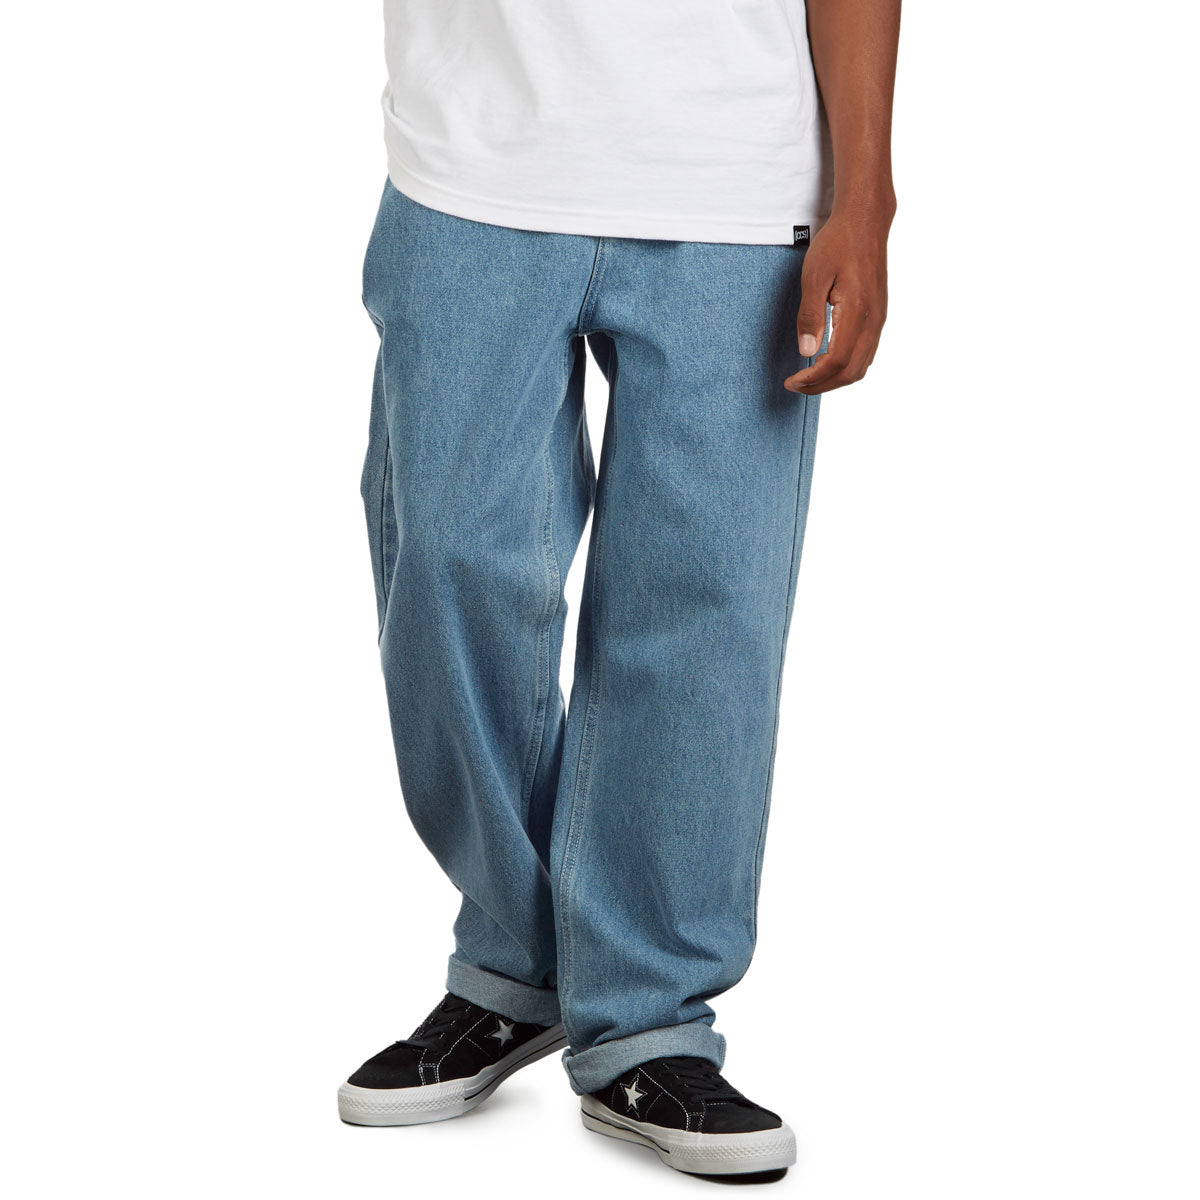 CCS Original Relaxed Denim Jeans - Rinsed Blue image 4